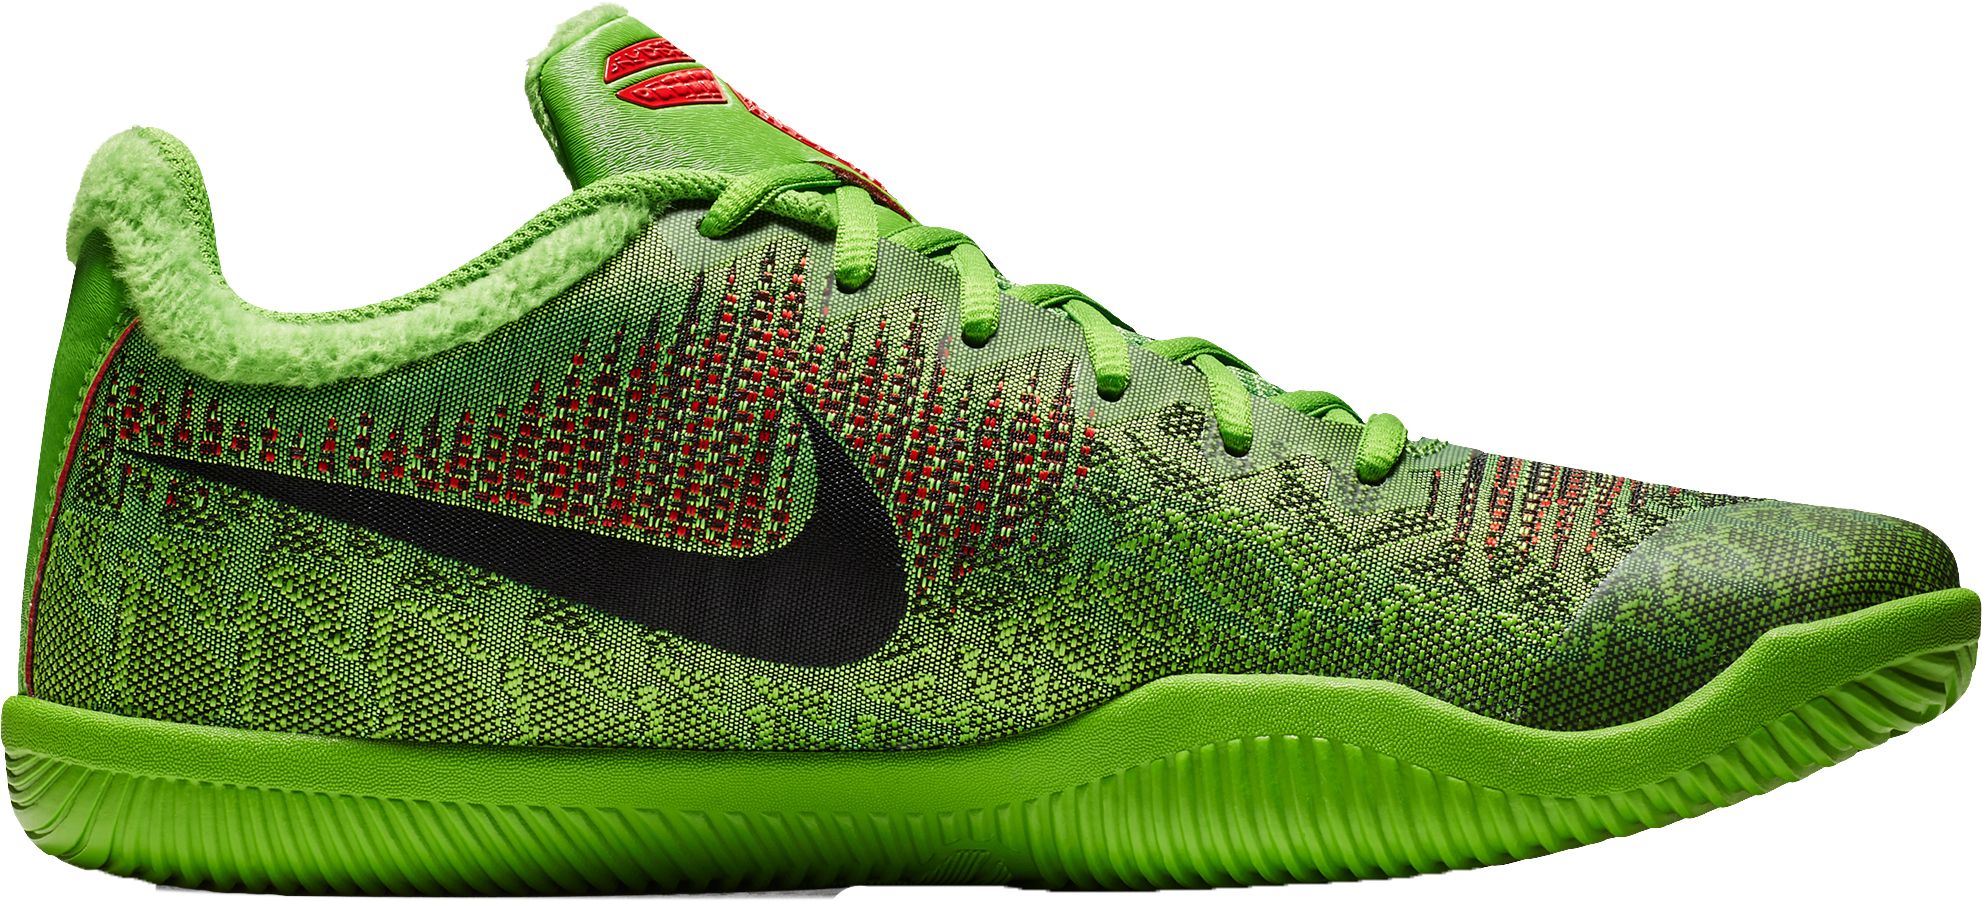 Green Basketball Shoes | Best Price Guarantee at DICK'S